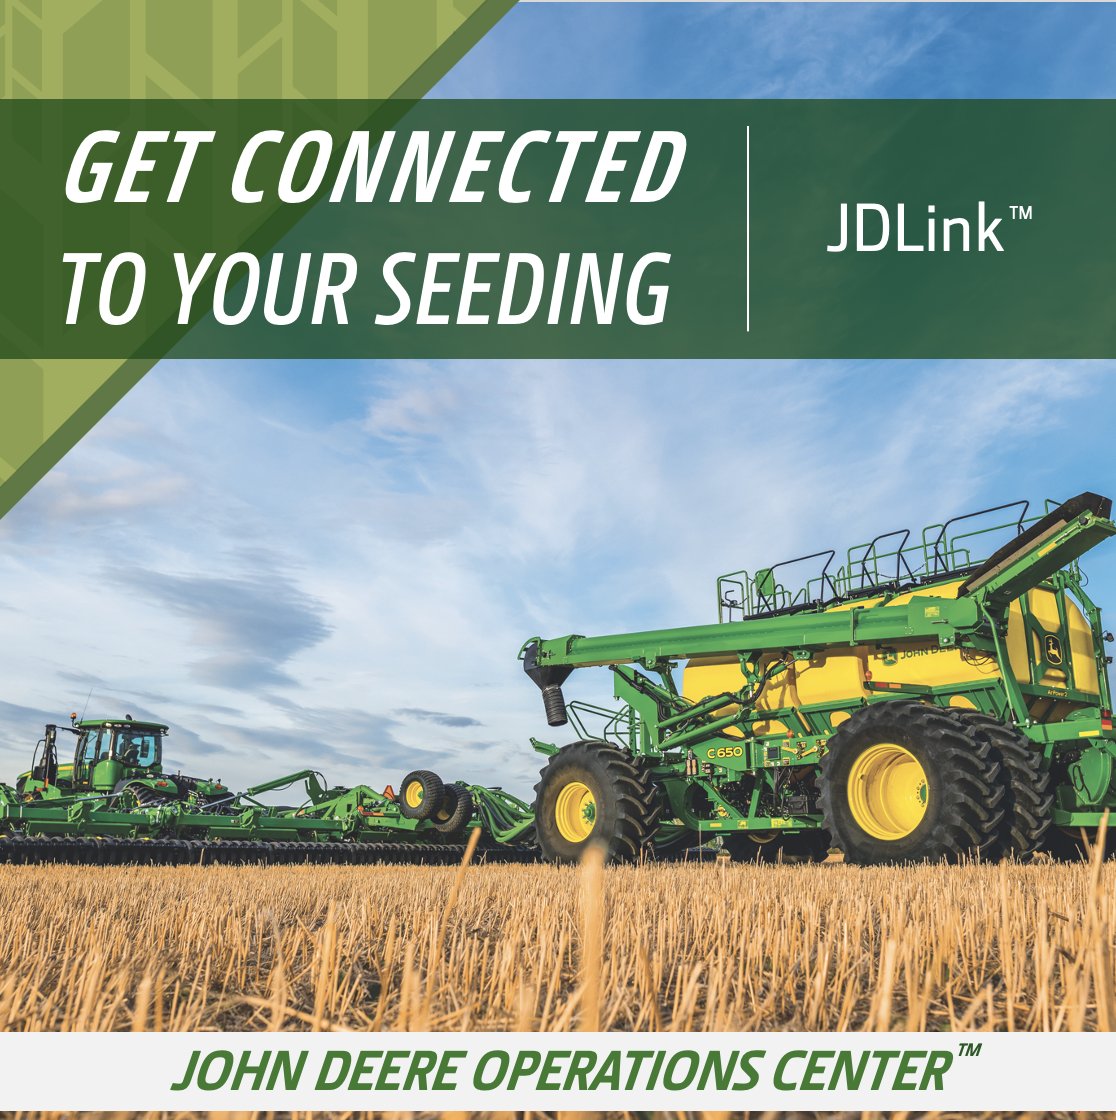 Its almost that time....are you ready??

Planting the seeds of connectivity with JD Link. Get linked, get growing 🌾Talk to our Precision Ag team today bit.ly/3vdAnED